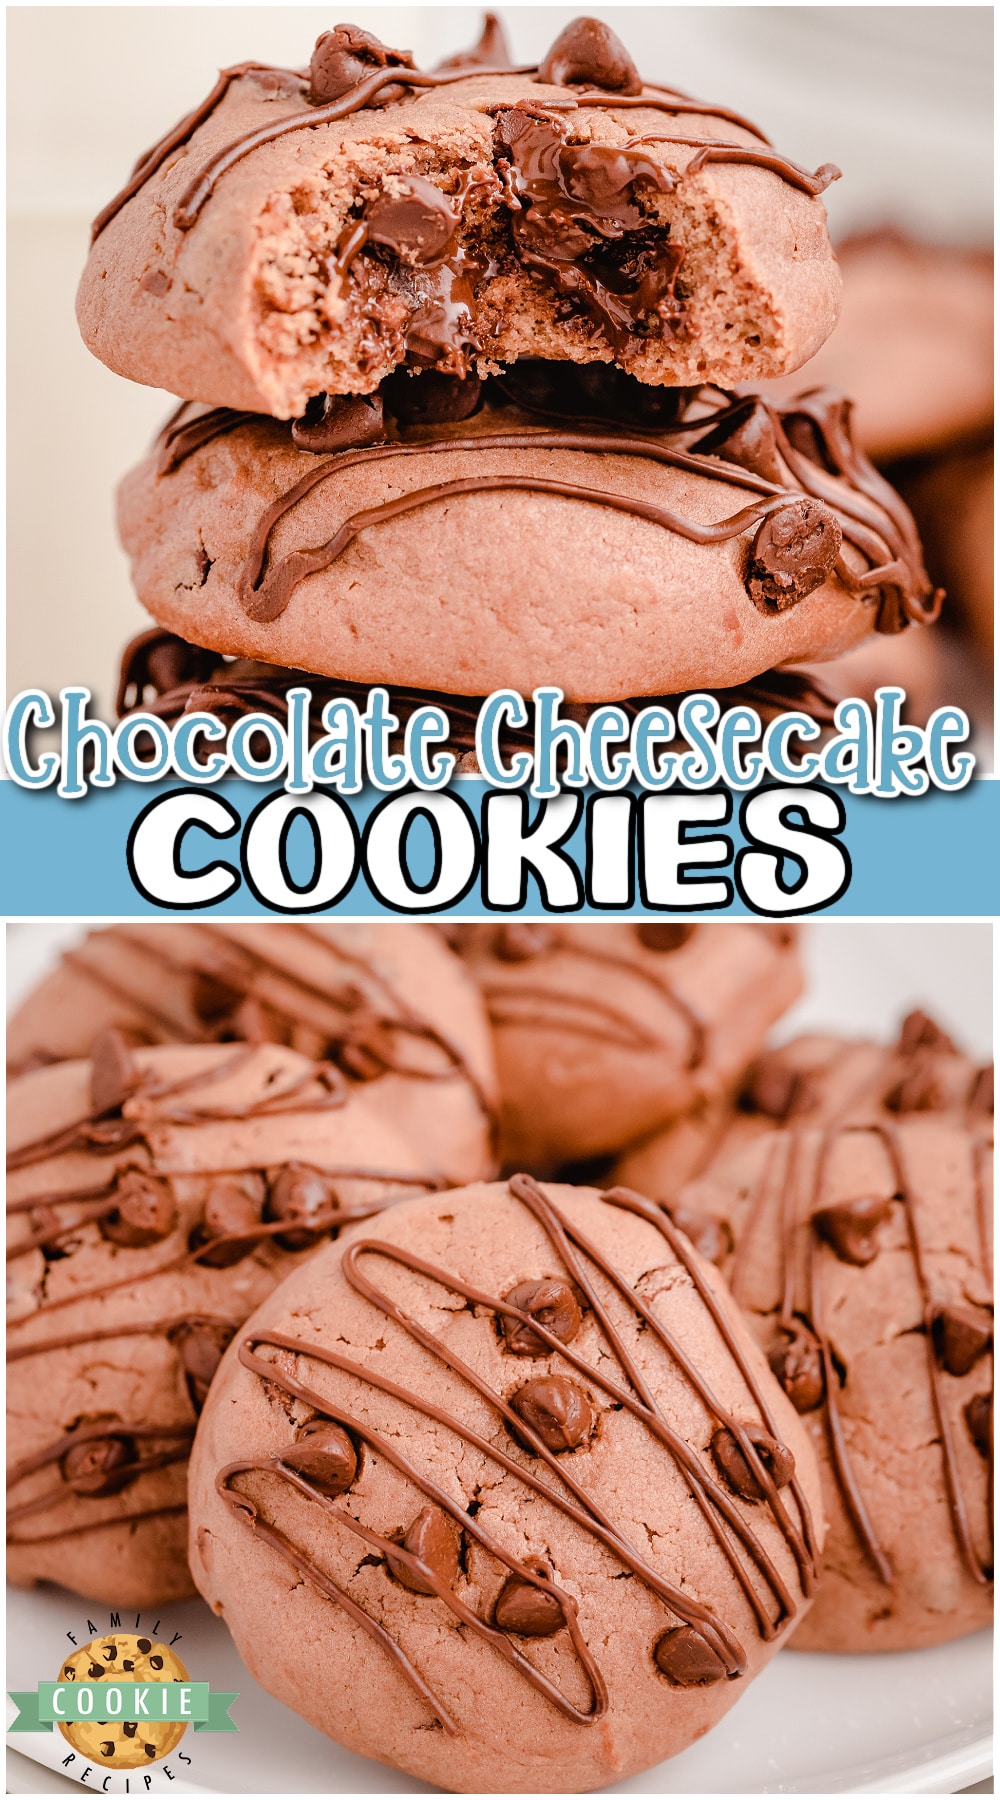 Chocolate Cheesecake Cookies made with cream cheese & chocolate! Everything you love about cheesecake, in cookie form! Soft & chewy cheesecake cookies with 2x the chocolate! via @buttergirls